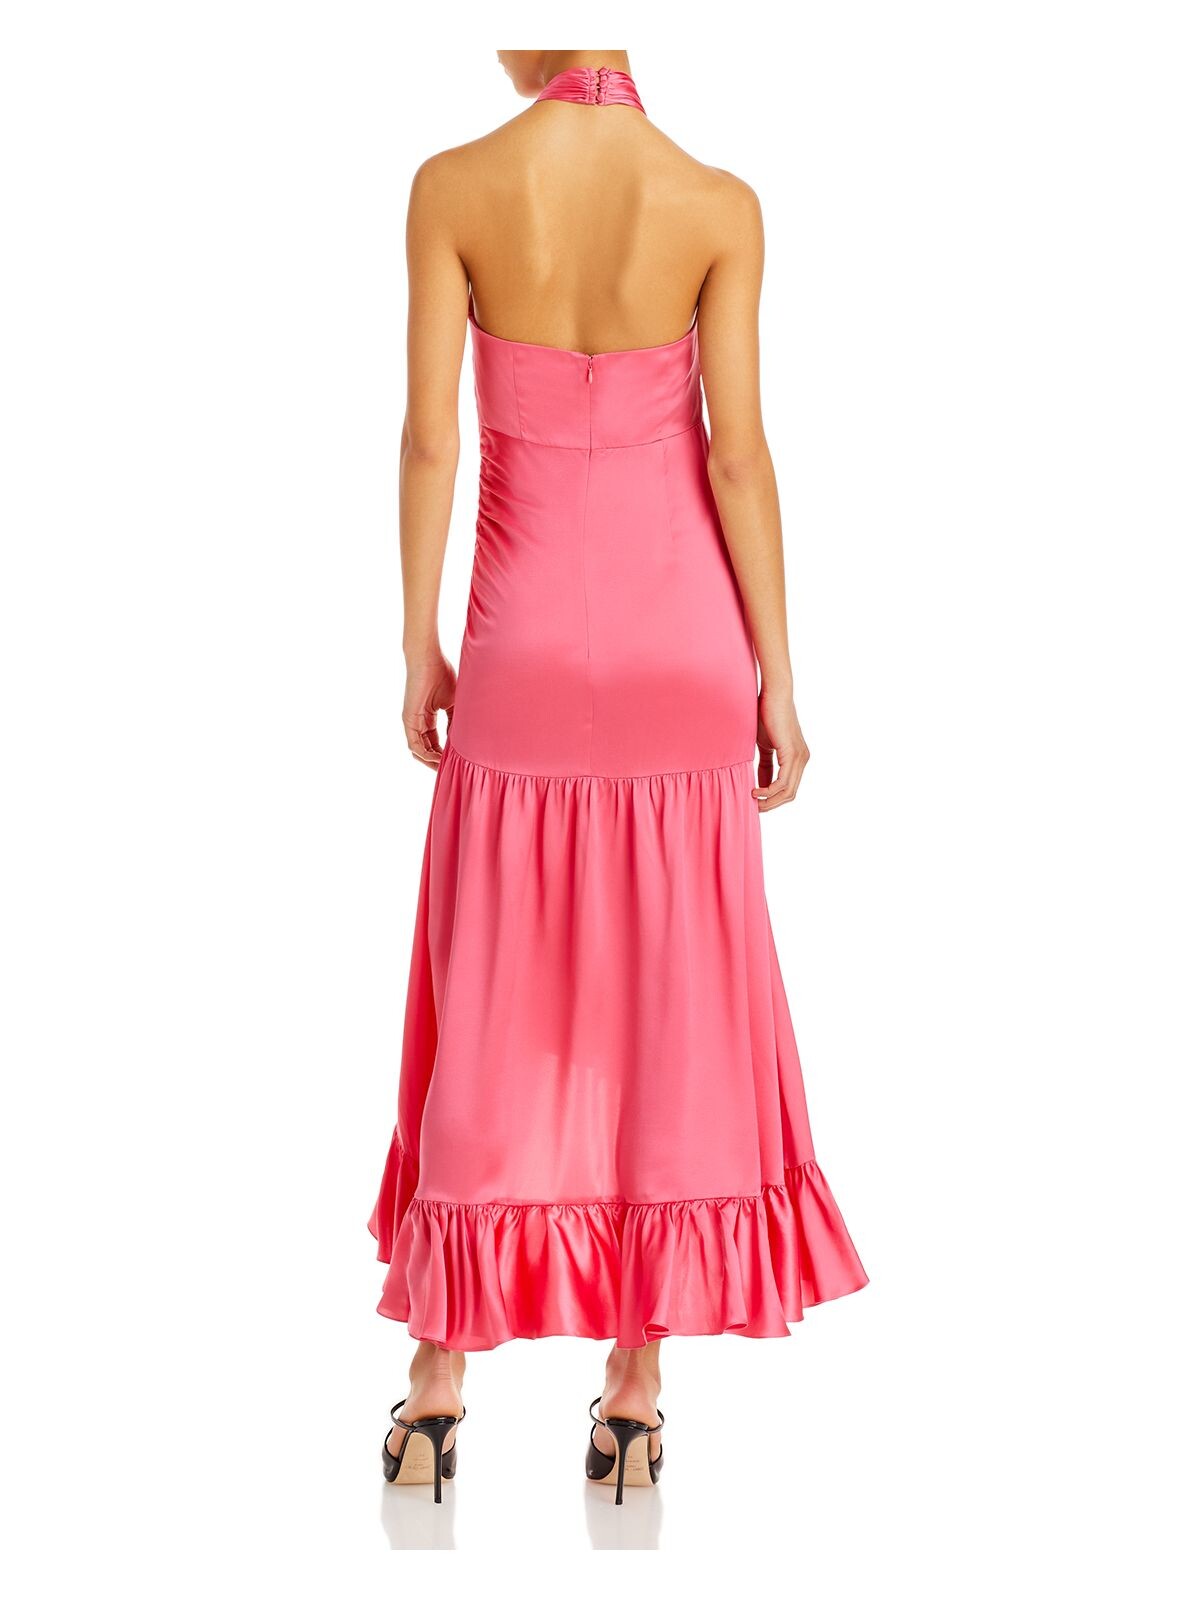 CINQ A SEPT Womens Pink Zippered Ruffled Pleated Unlined Tiered Sleeveless Halter Maxi Fit + Flare Dress 6